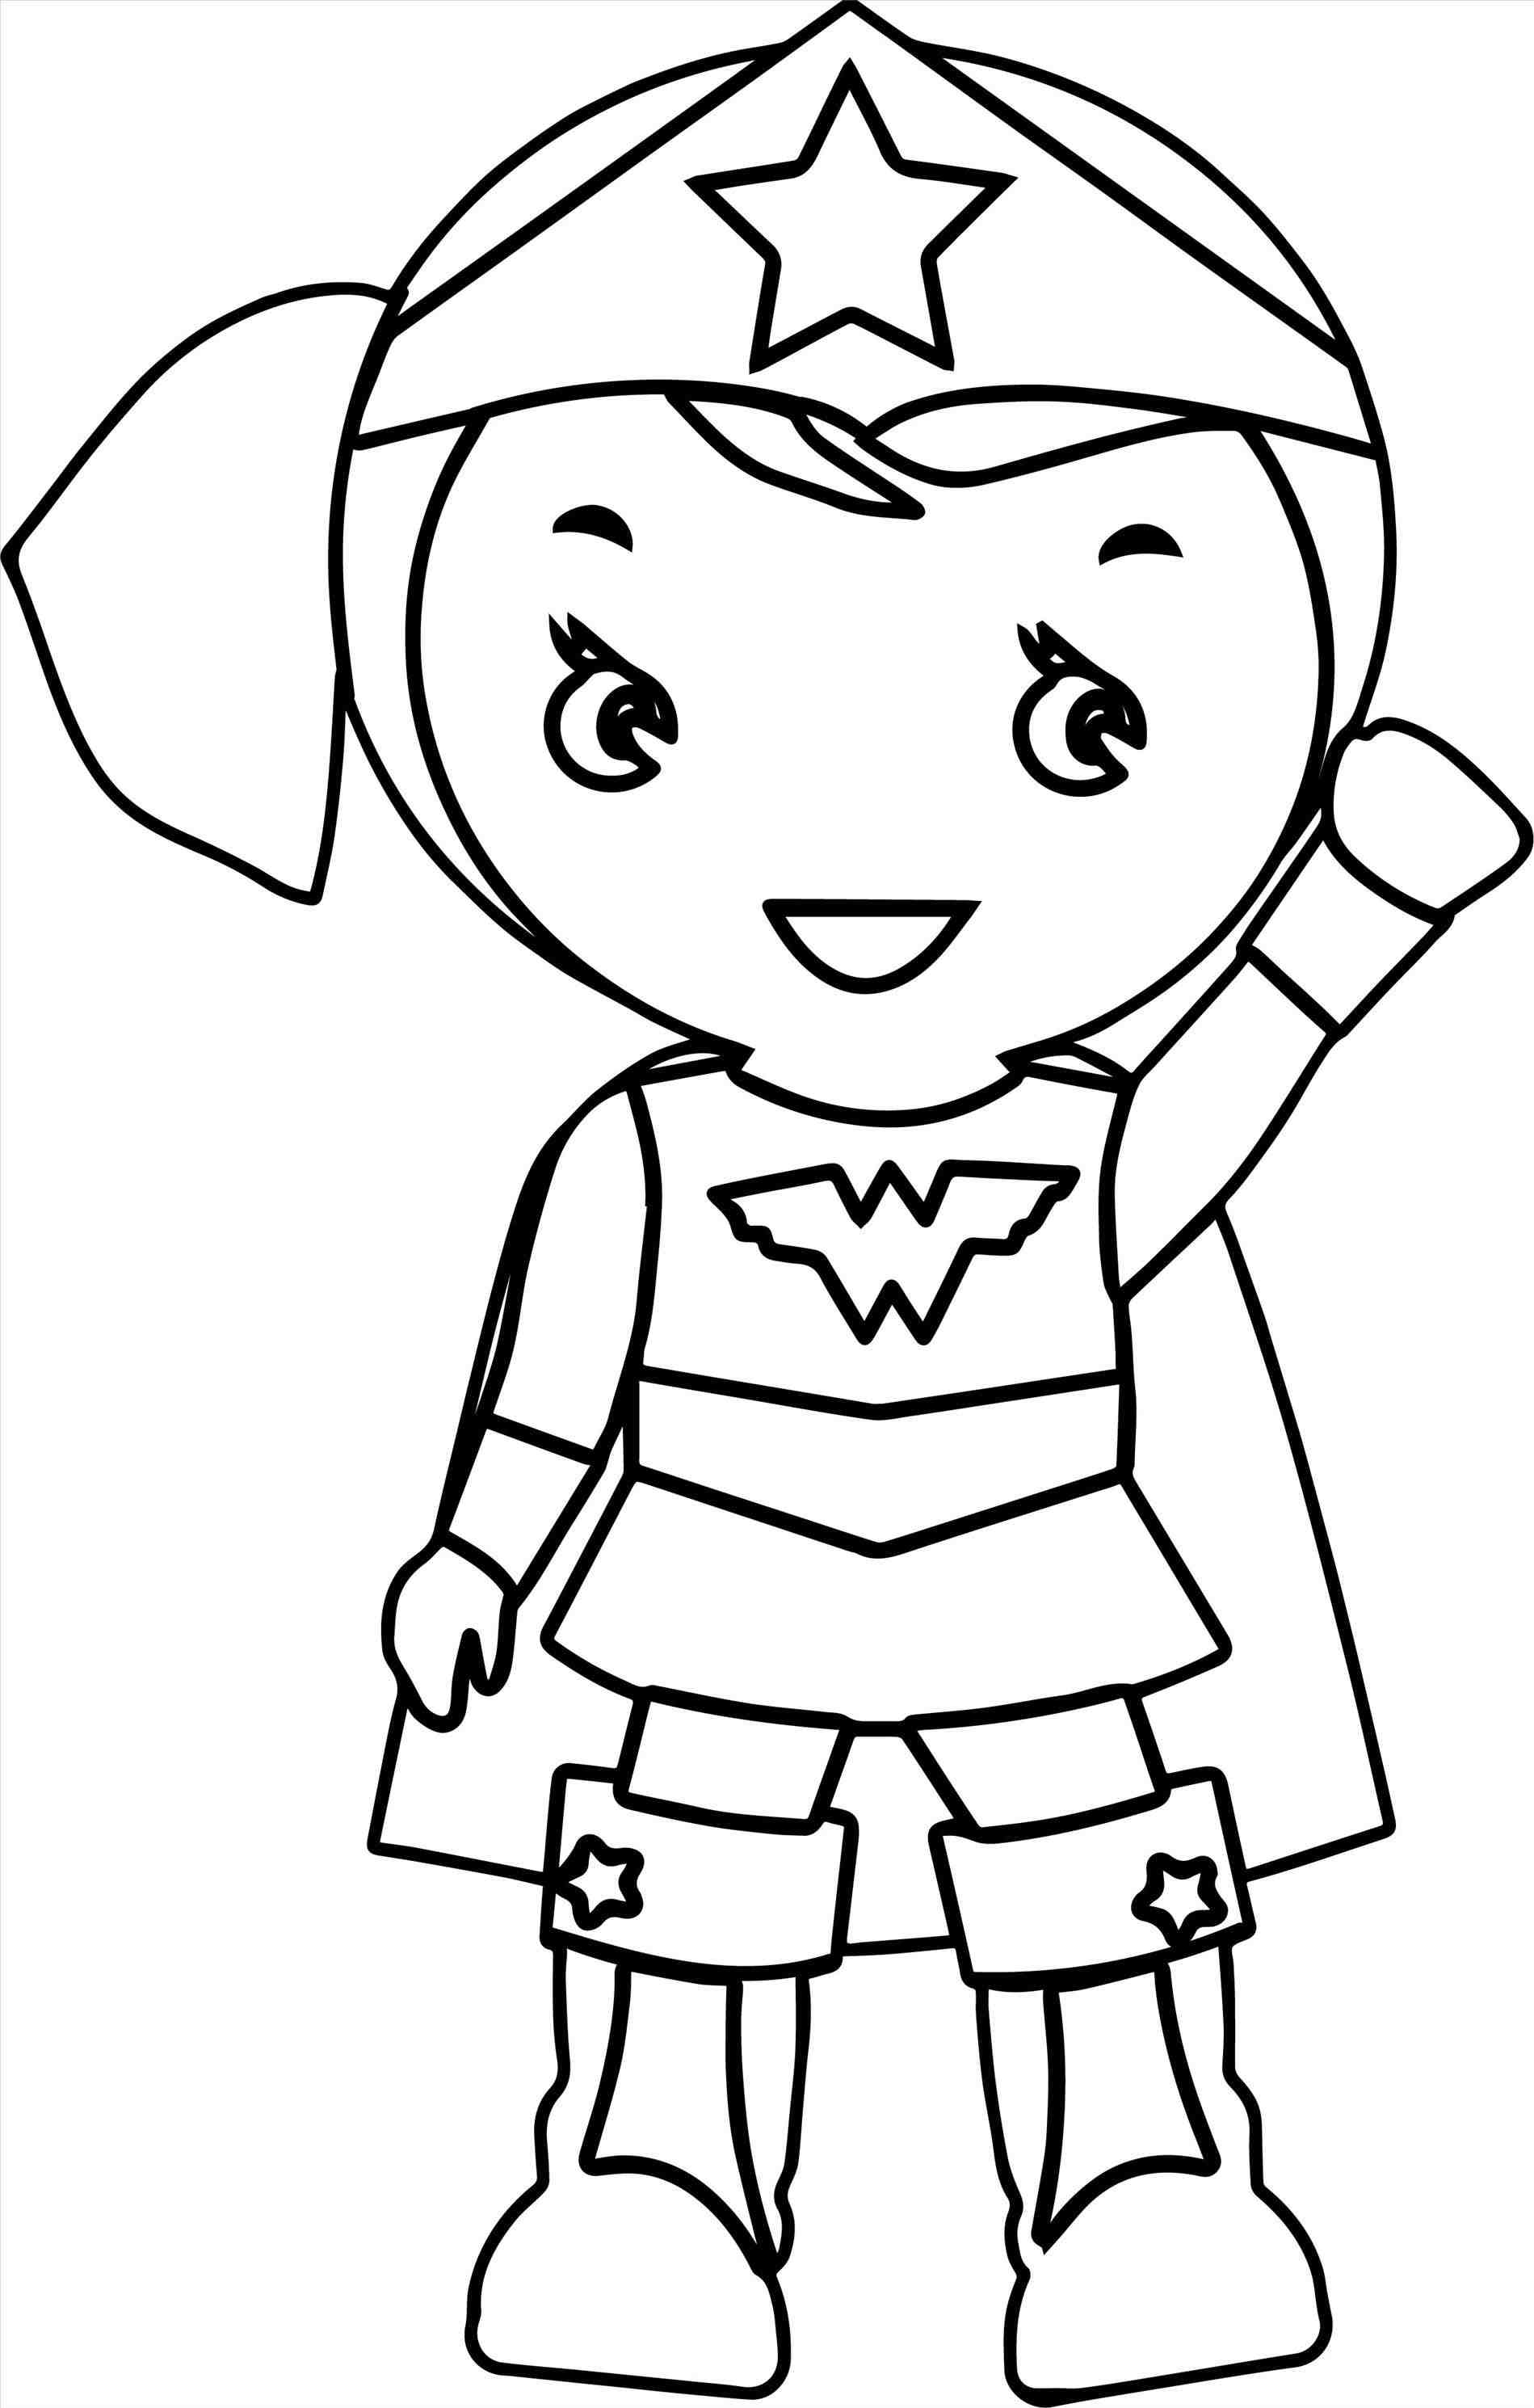 Wonder Woman Coloring Pages | Free download on ClipArtMag